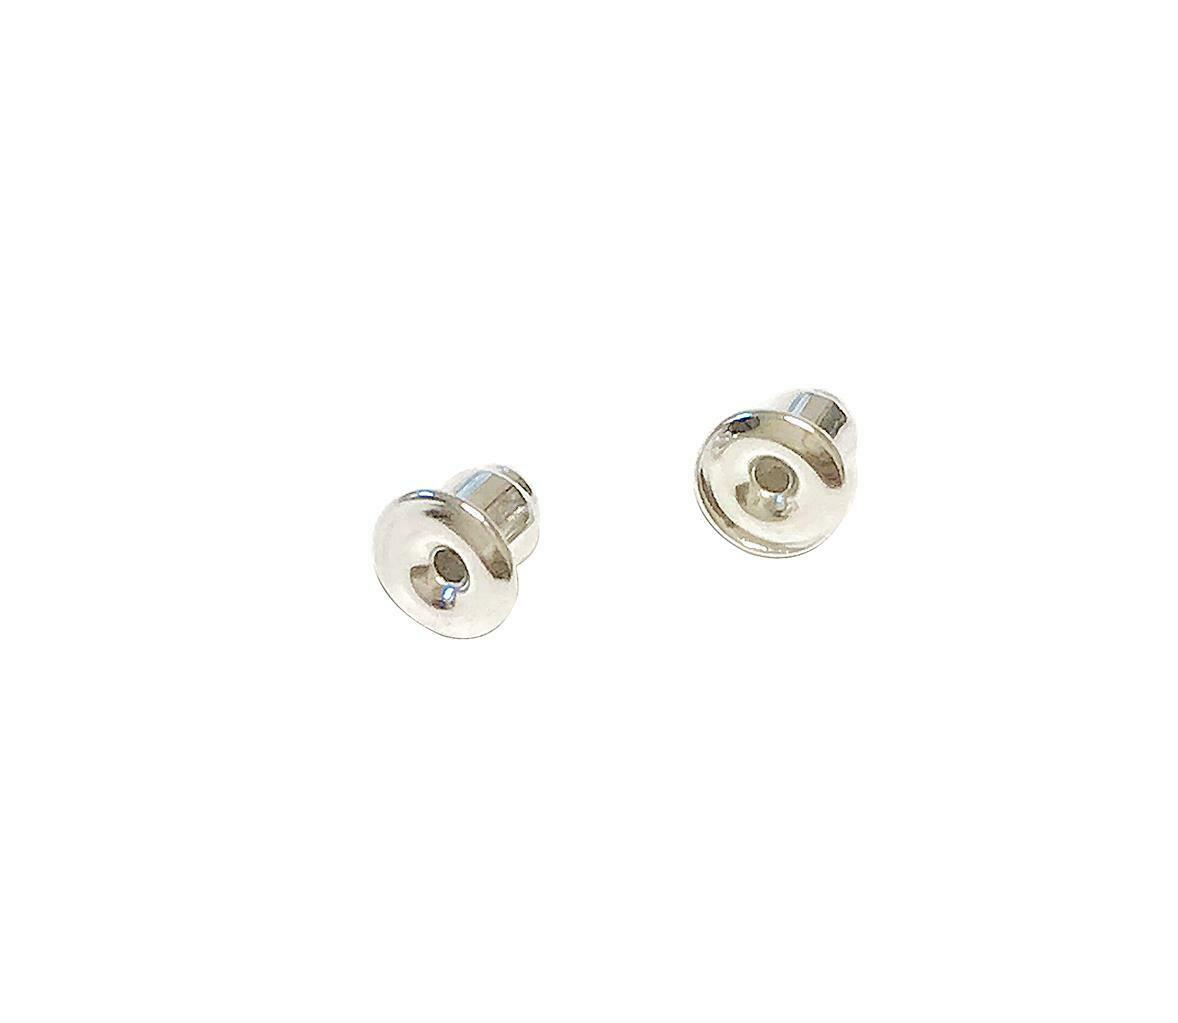 Secure aluminium on silicon rubber 1 pair earring studs backing